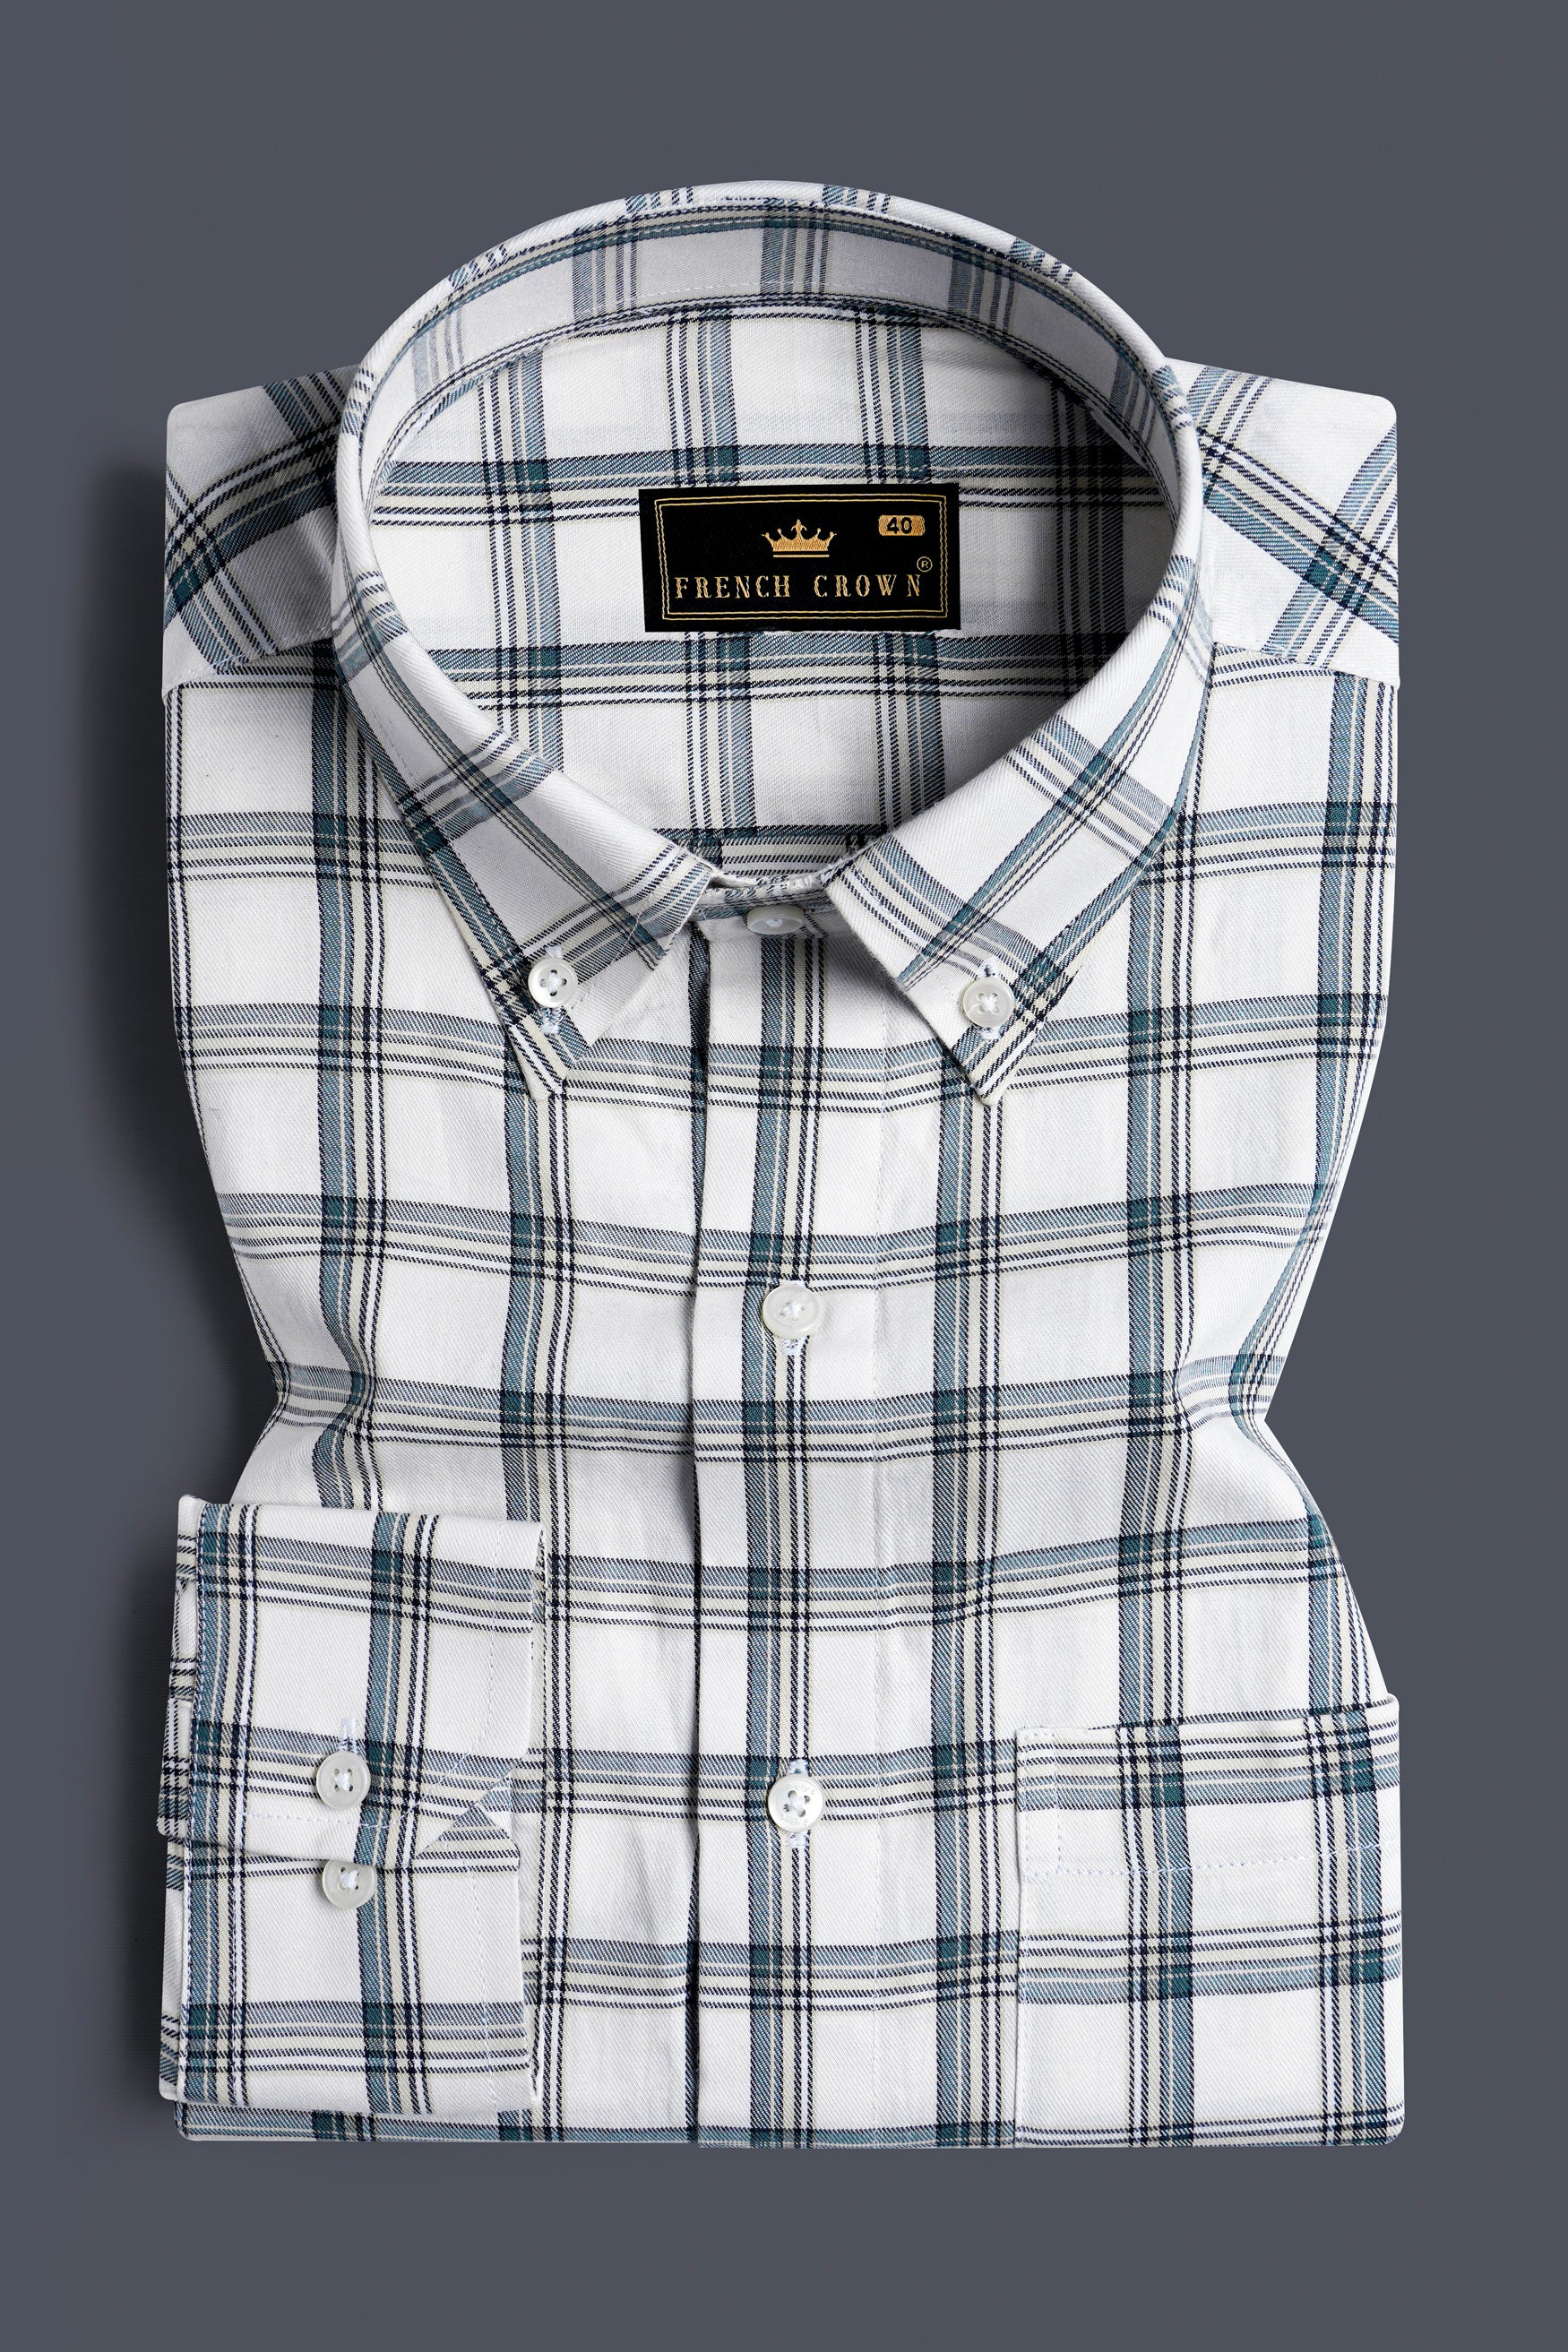 Bright White and Casal Blue Twill Plaid Premium Cotton Shirt 11753-BD-38, 11753-BD-H-38, 11753-BD-39, 11753-BD-H-39, 11753-BD-40, 11753-BD-H-40, 11753-BD-42, 11753-BD-H-42, 11753-BD-44, 11753-BD-H-44, 11753-BD-46, 11753-BD-H-46, 11753-BD-48, 11753-BD-H-48, 11753-BD-50, 11753-BD-H-50, 11753-BD-52, 11753-BD-H-52